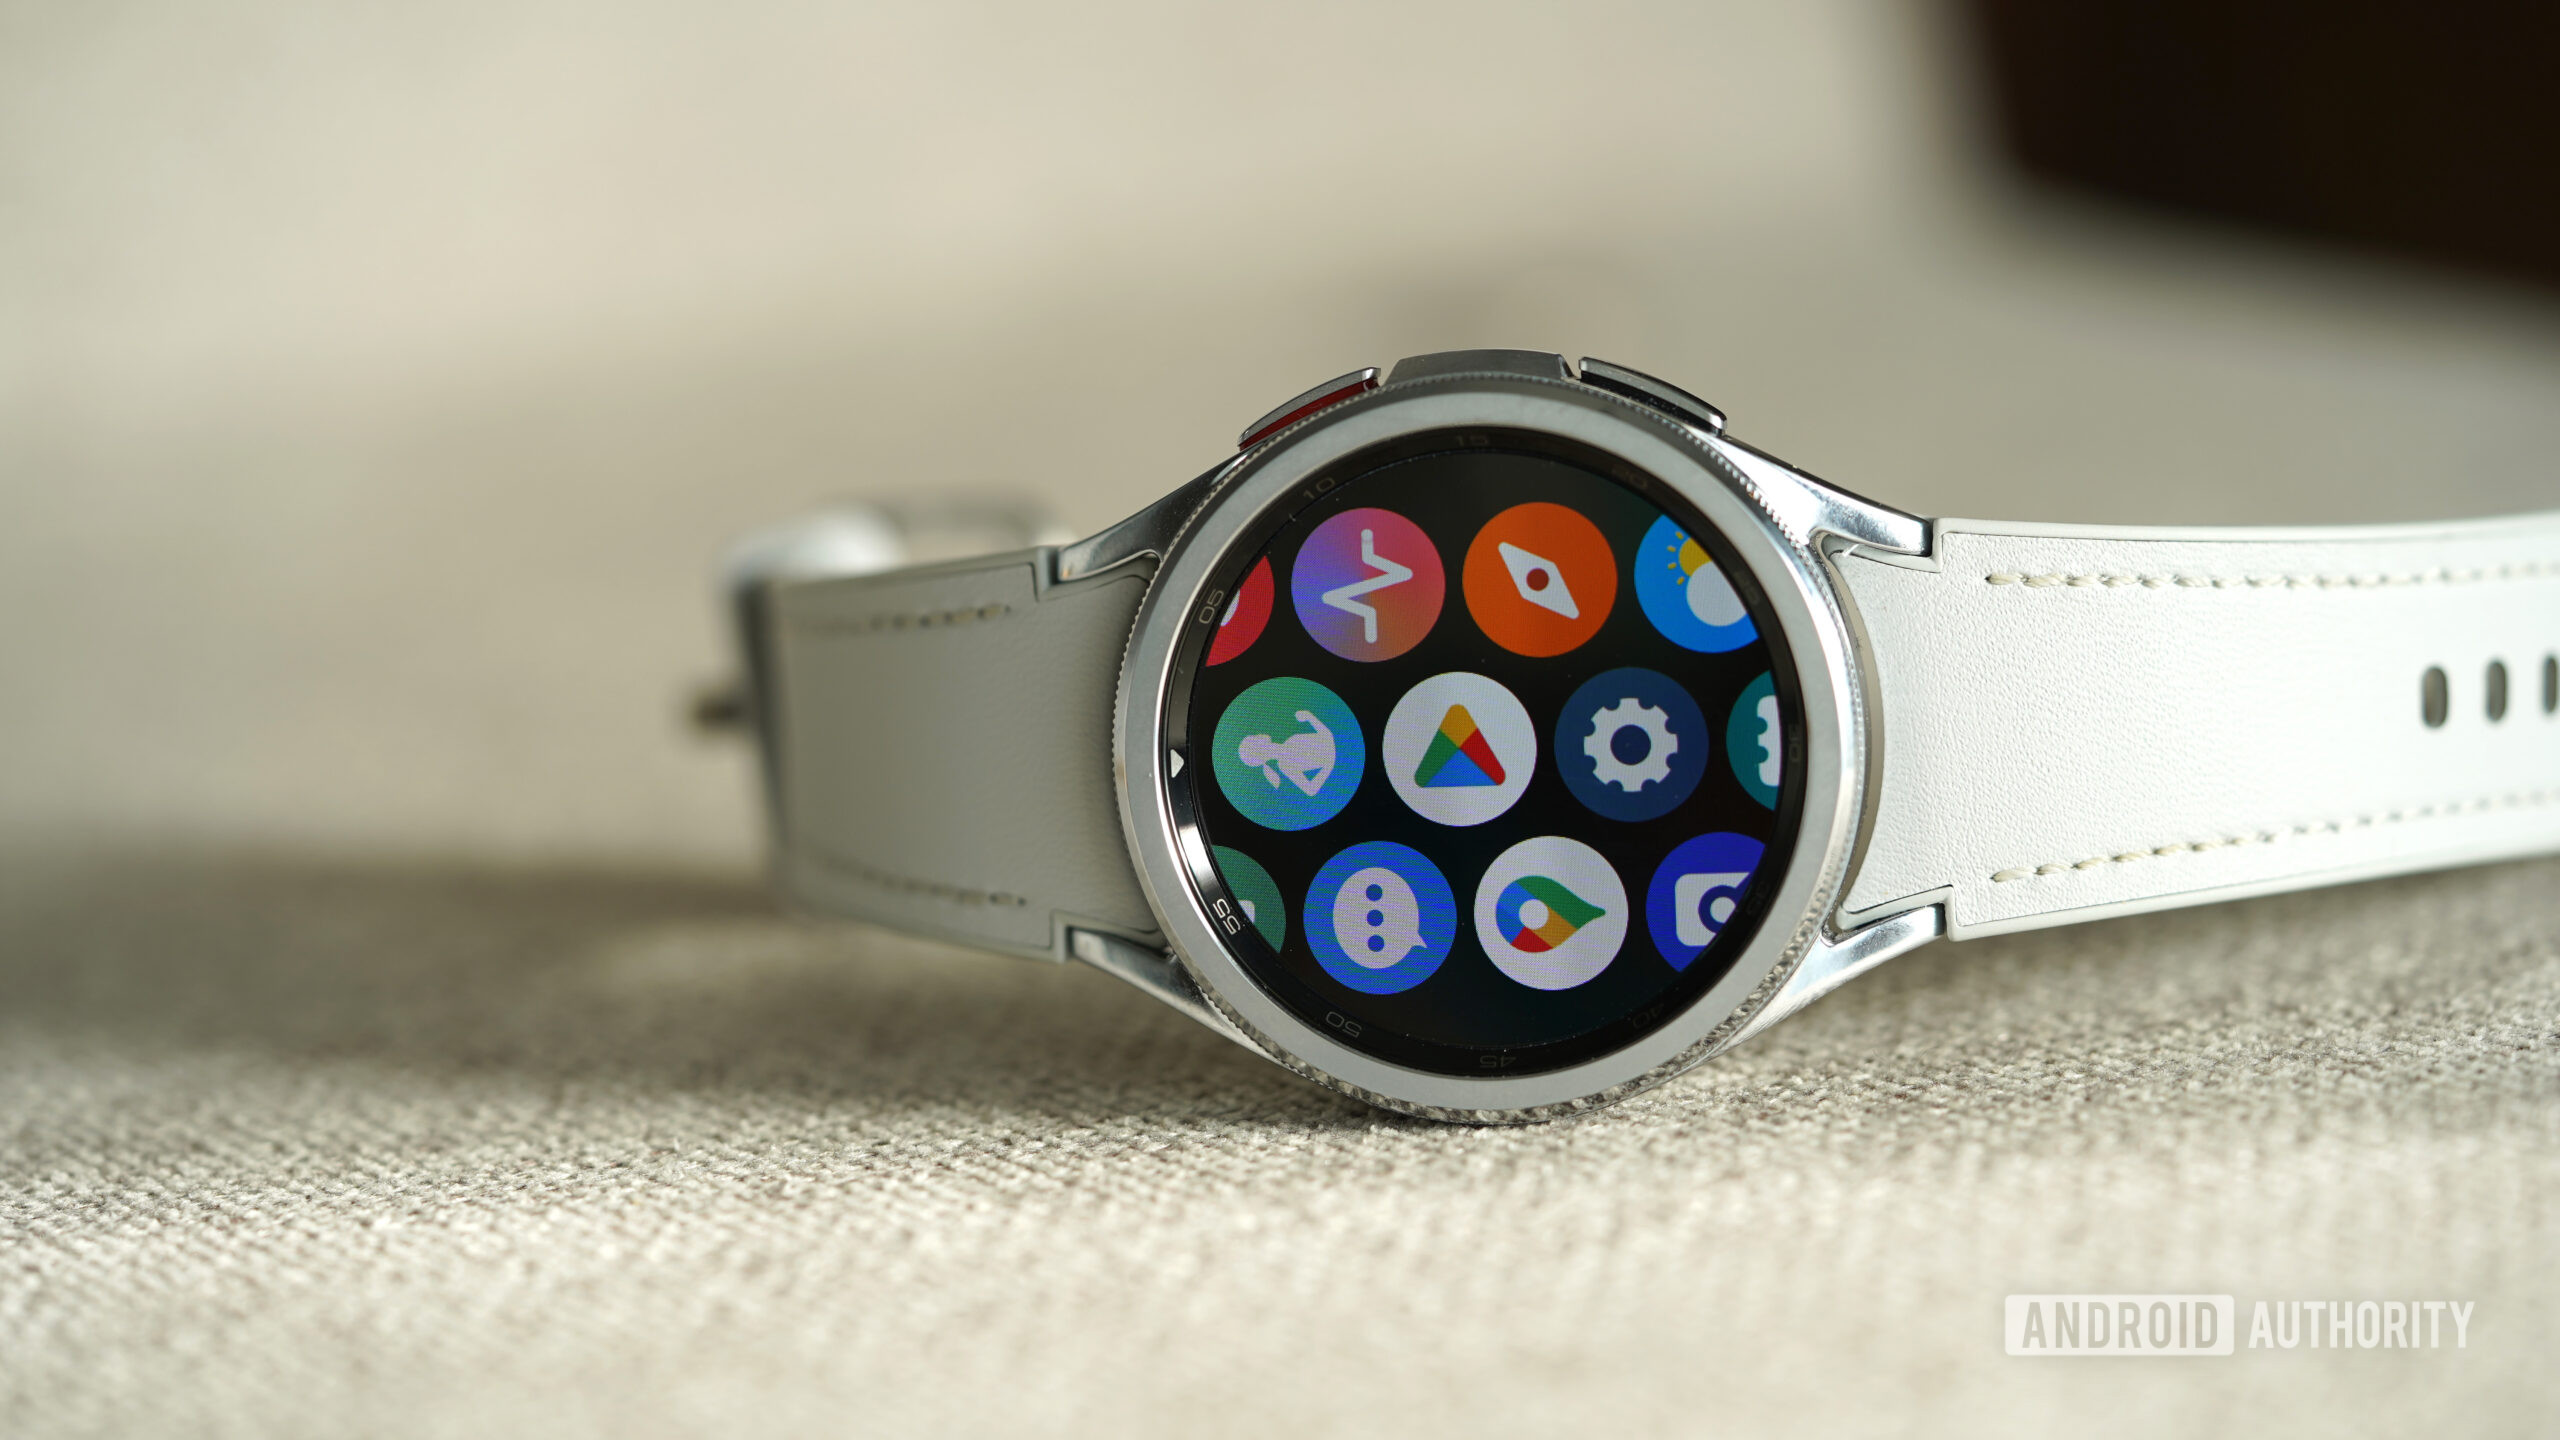 The Sasmung Galaxy Watch 6 Classic is one of the first two devices to have debuted Wear OS 4.